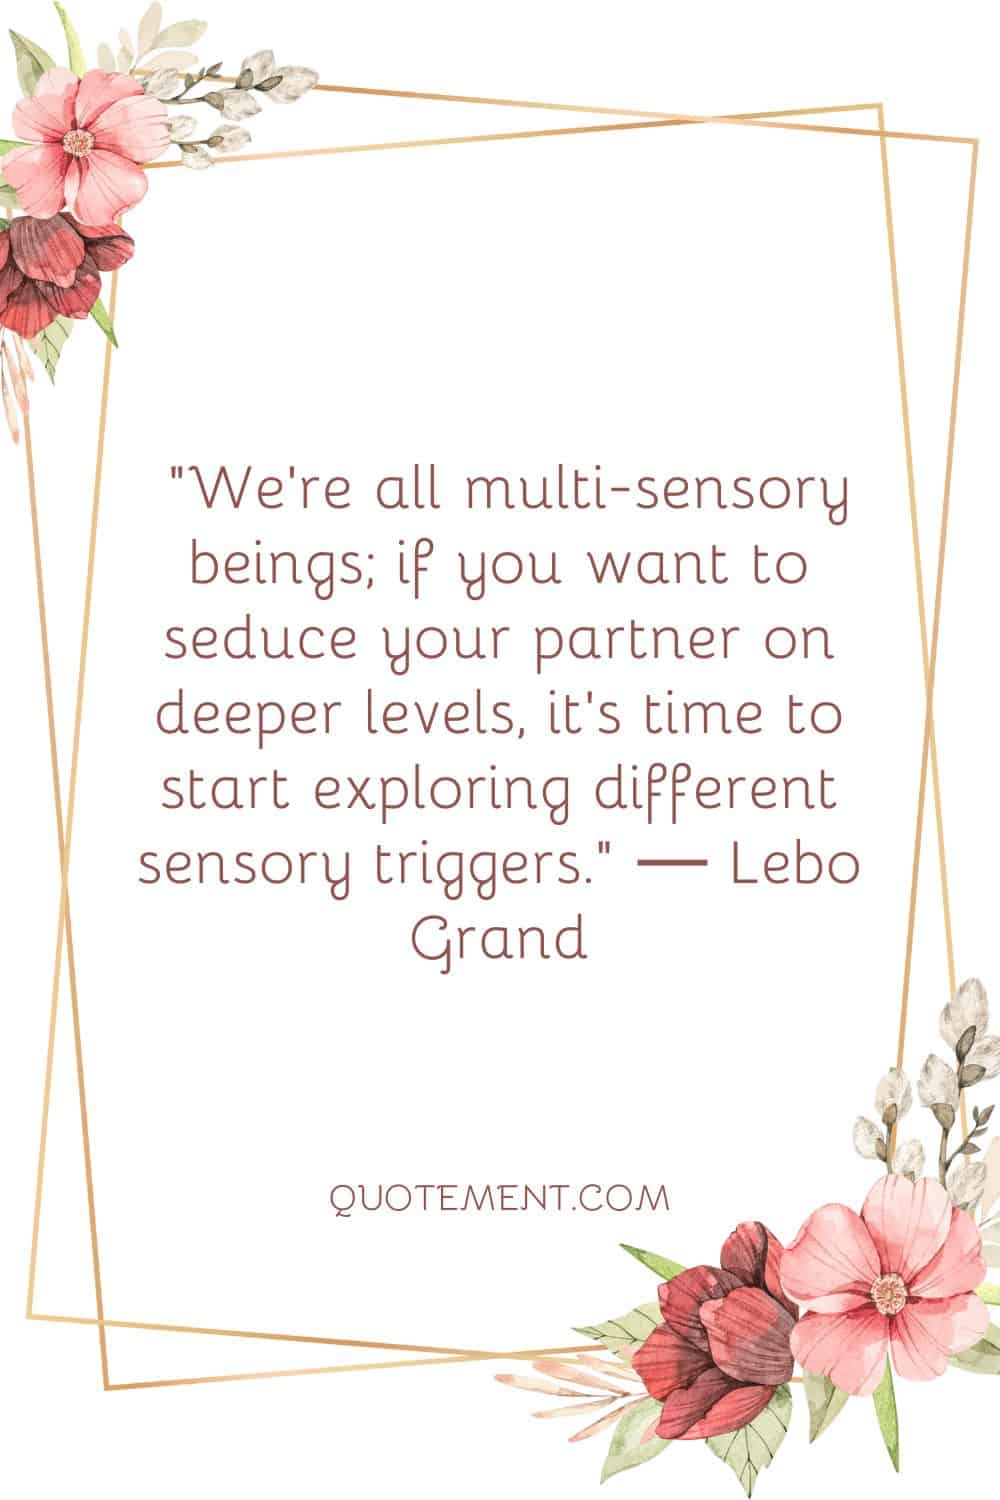 We’re all multi-sensory beings; if you want to seduce your partner on deeper levels, it’s time to start exploring different sensory triggers